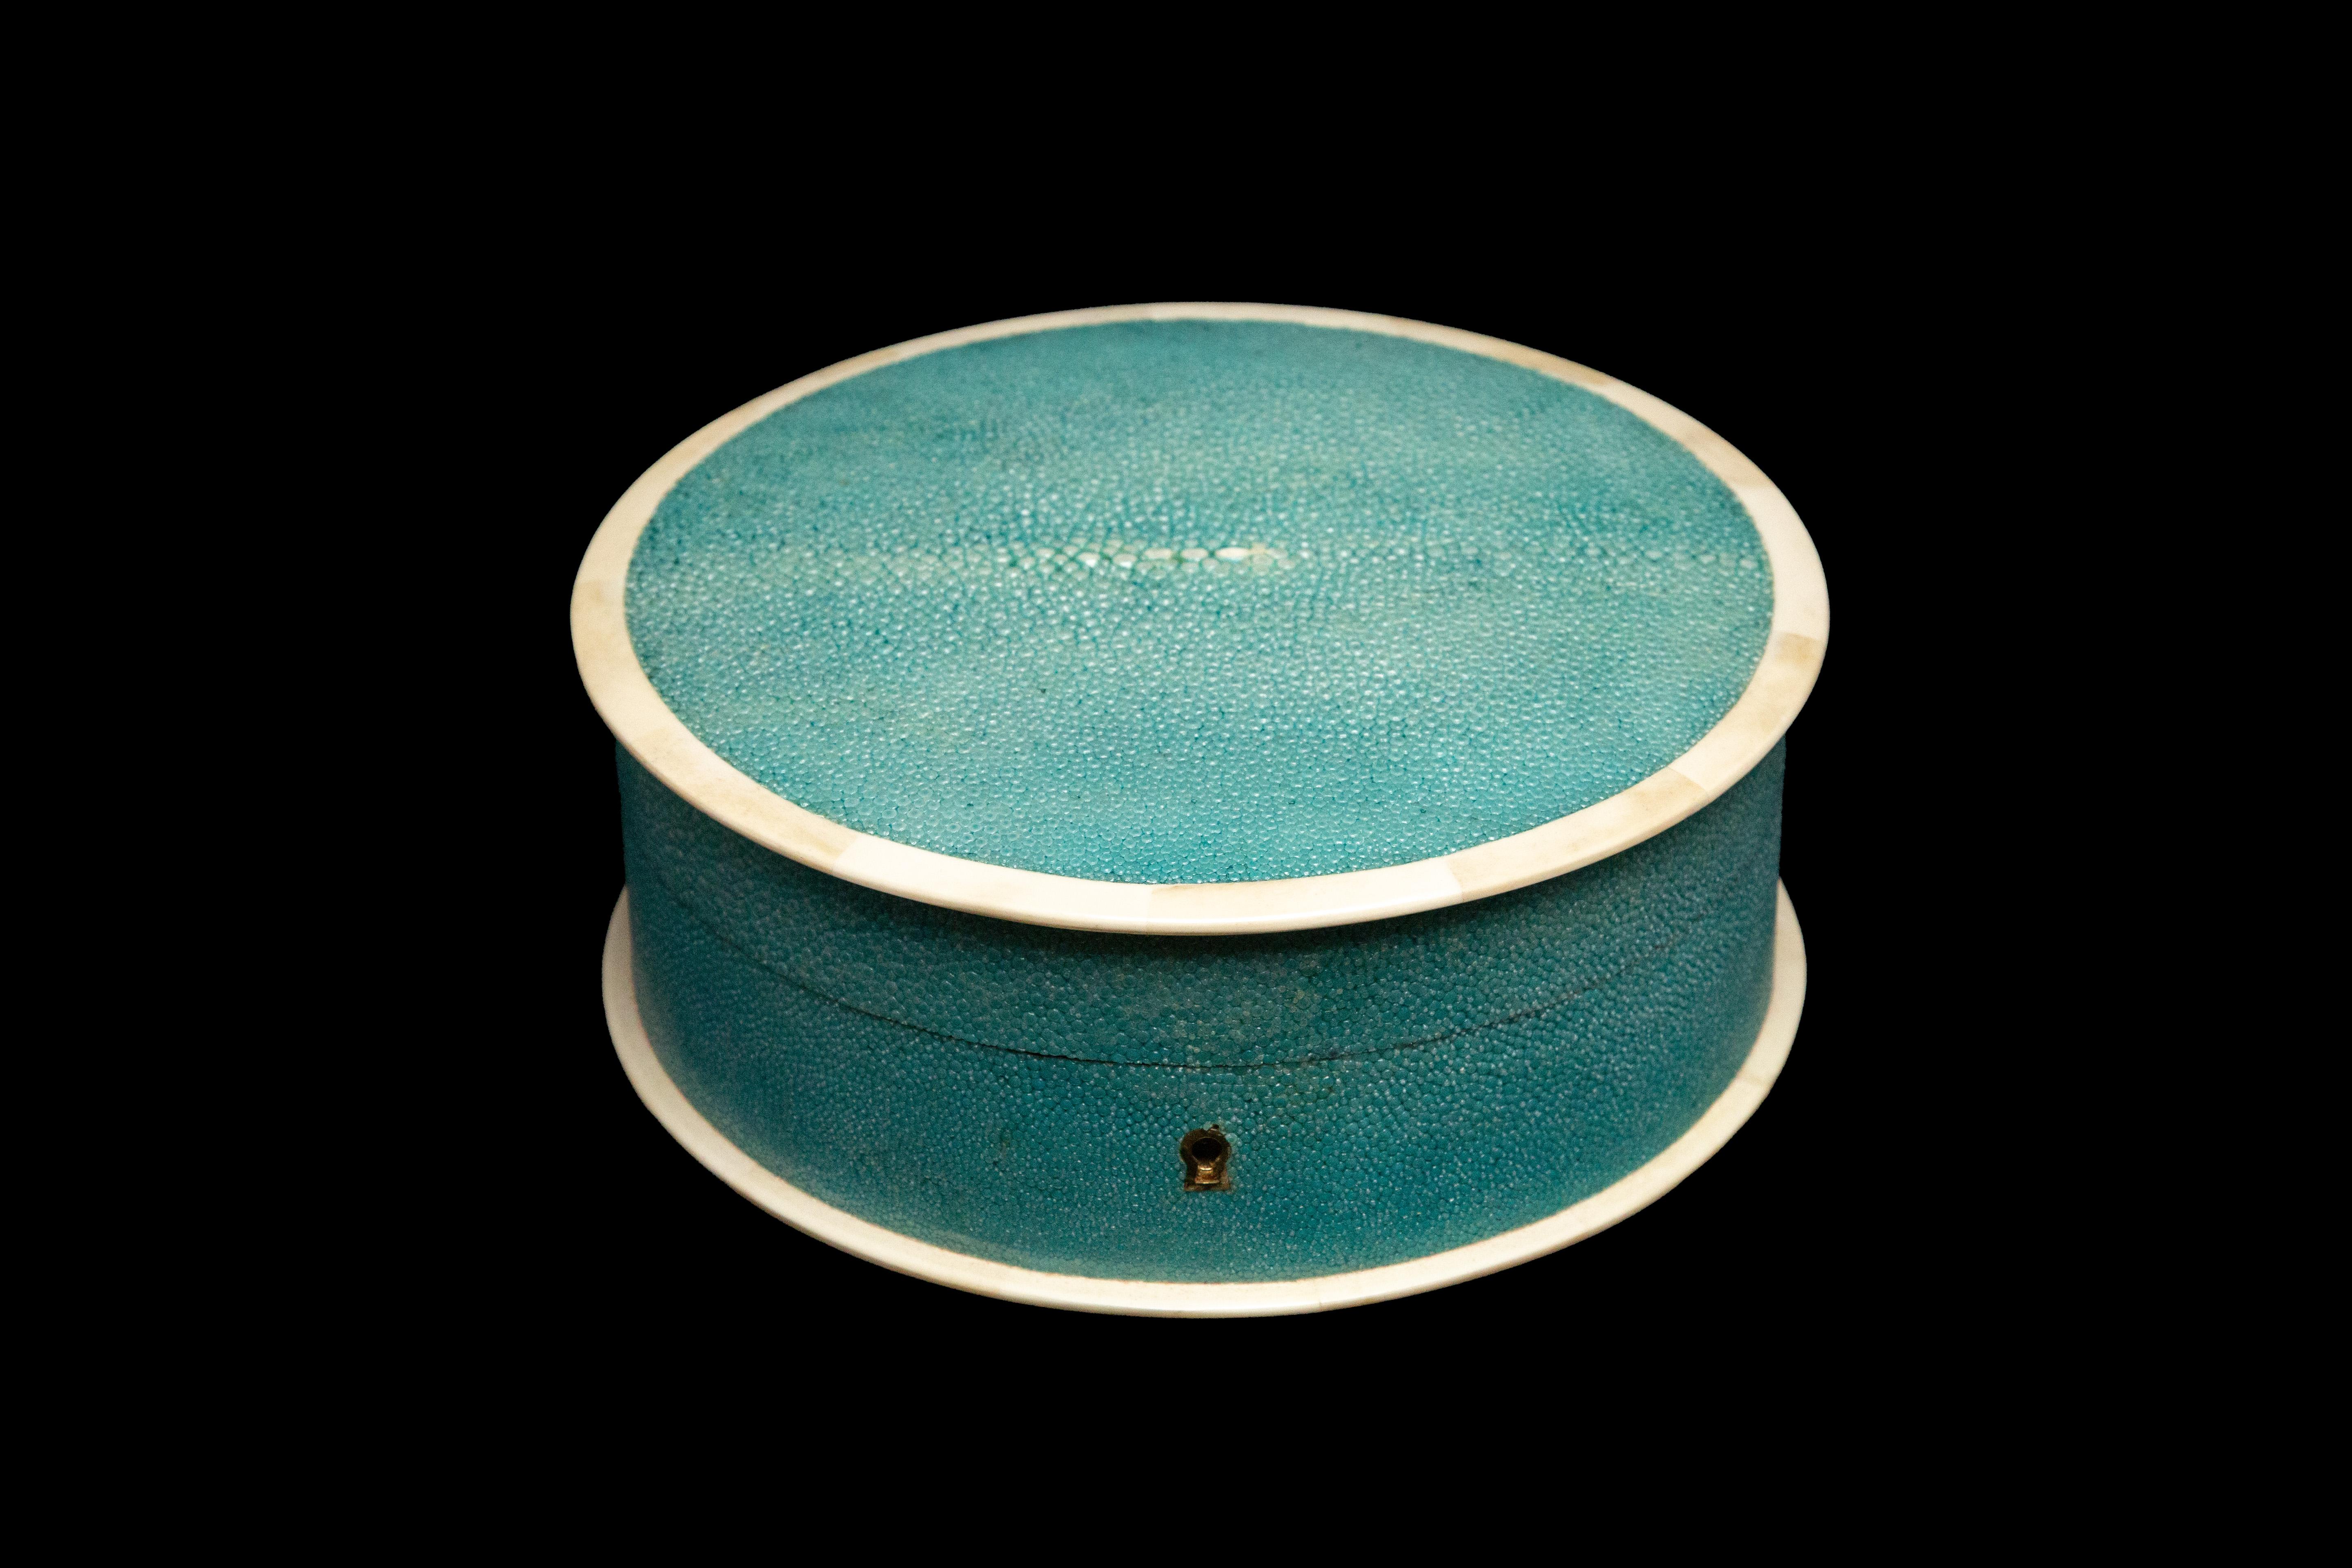 Round Pale Blue Shagreen jewelry box

Measures approximately: 9.5